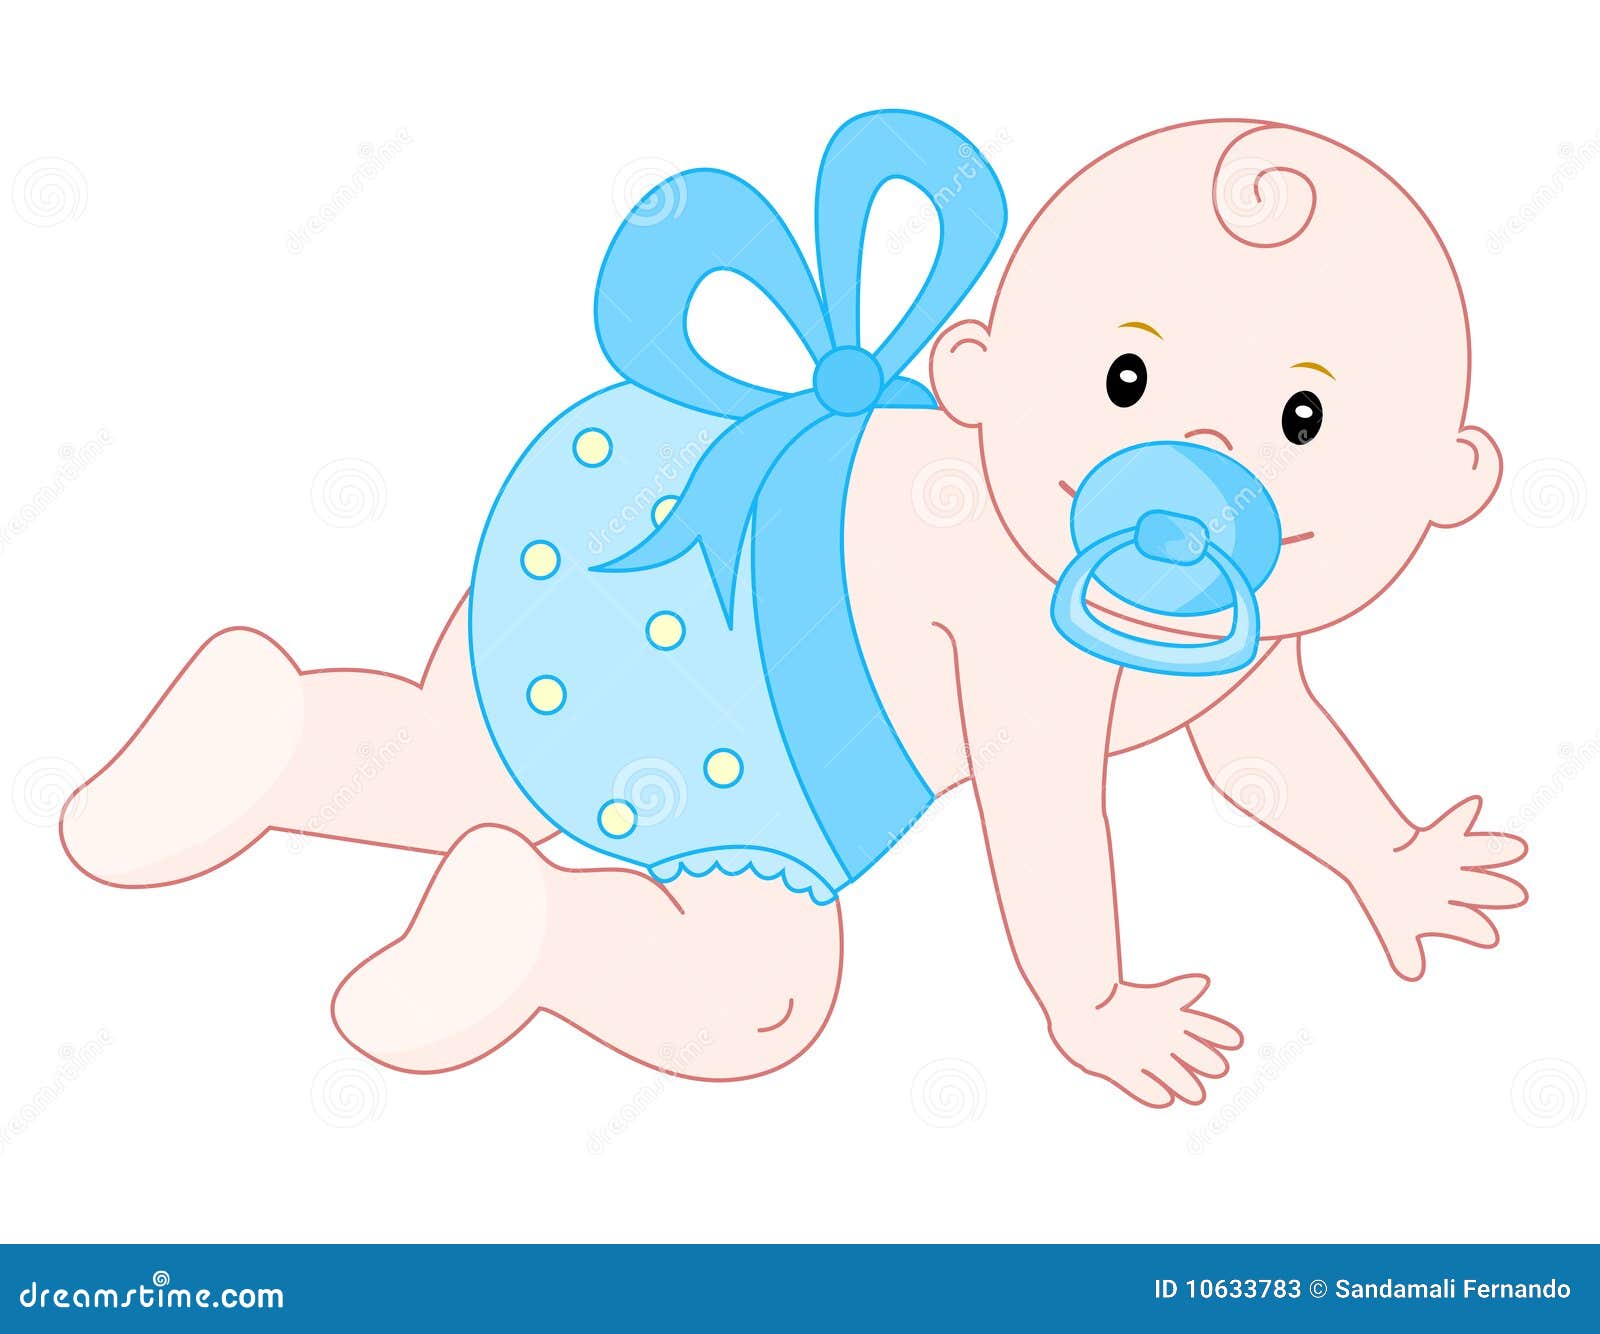 baby laughing clipart - photo #4